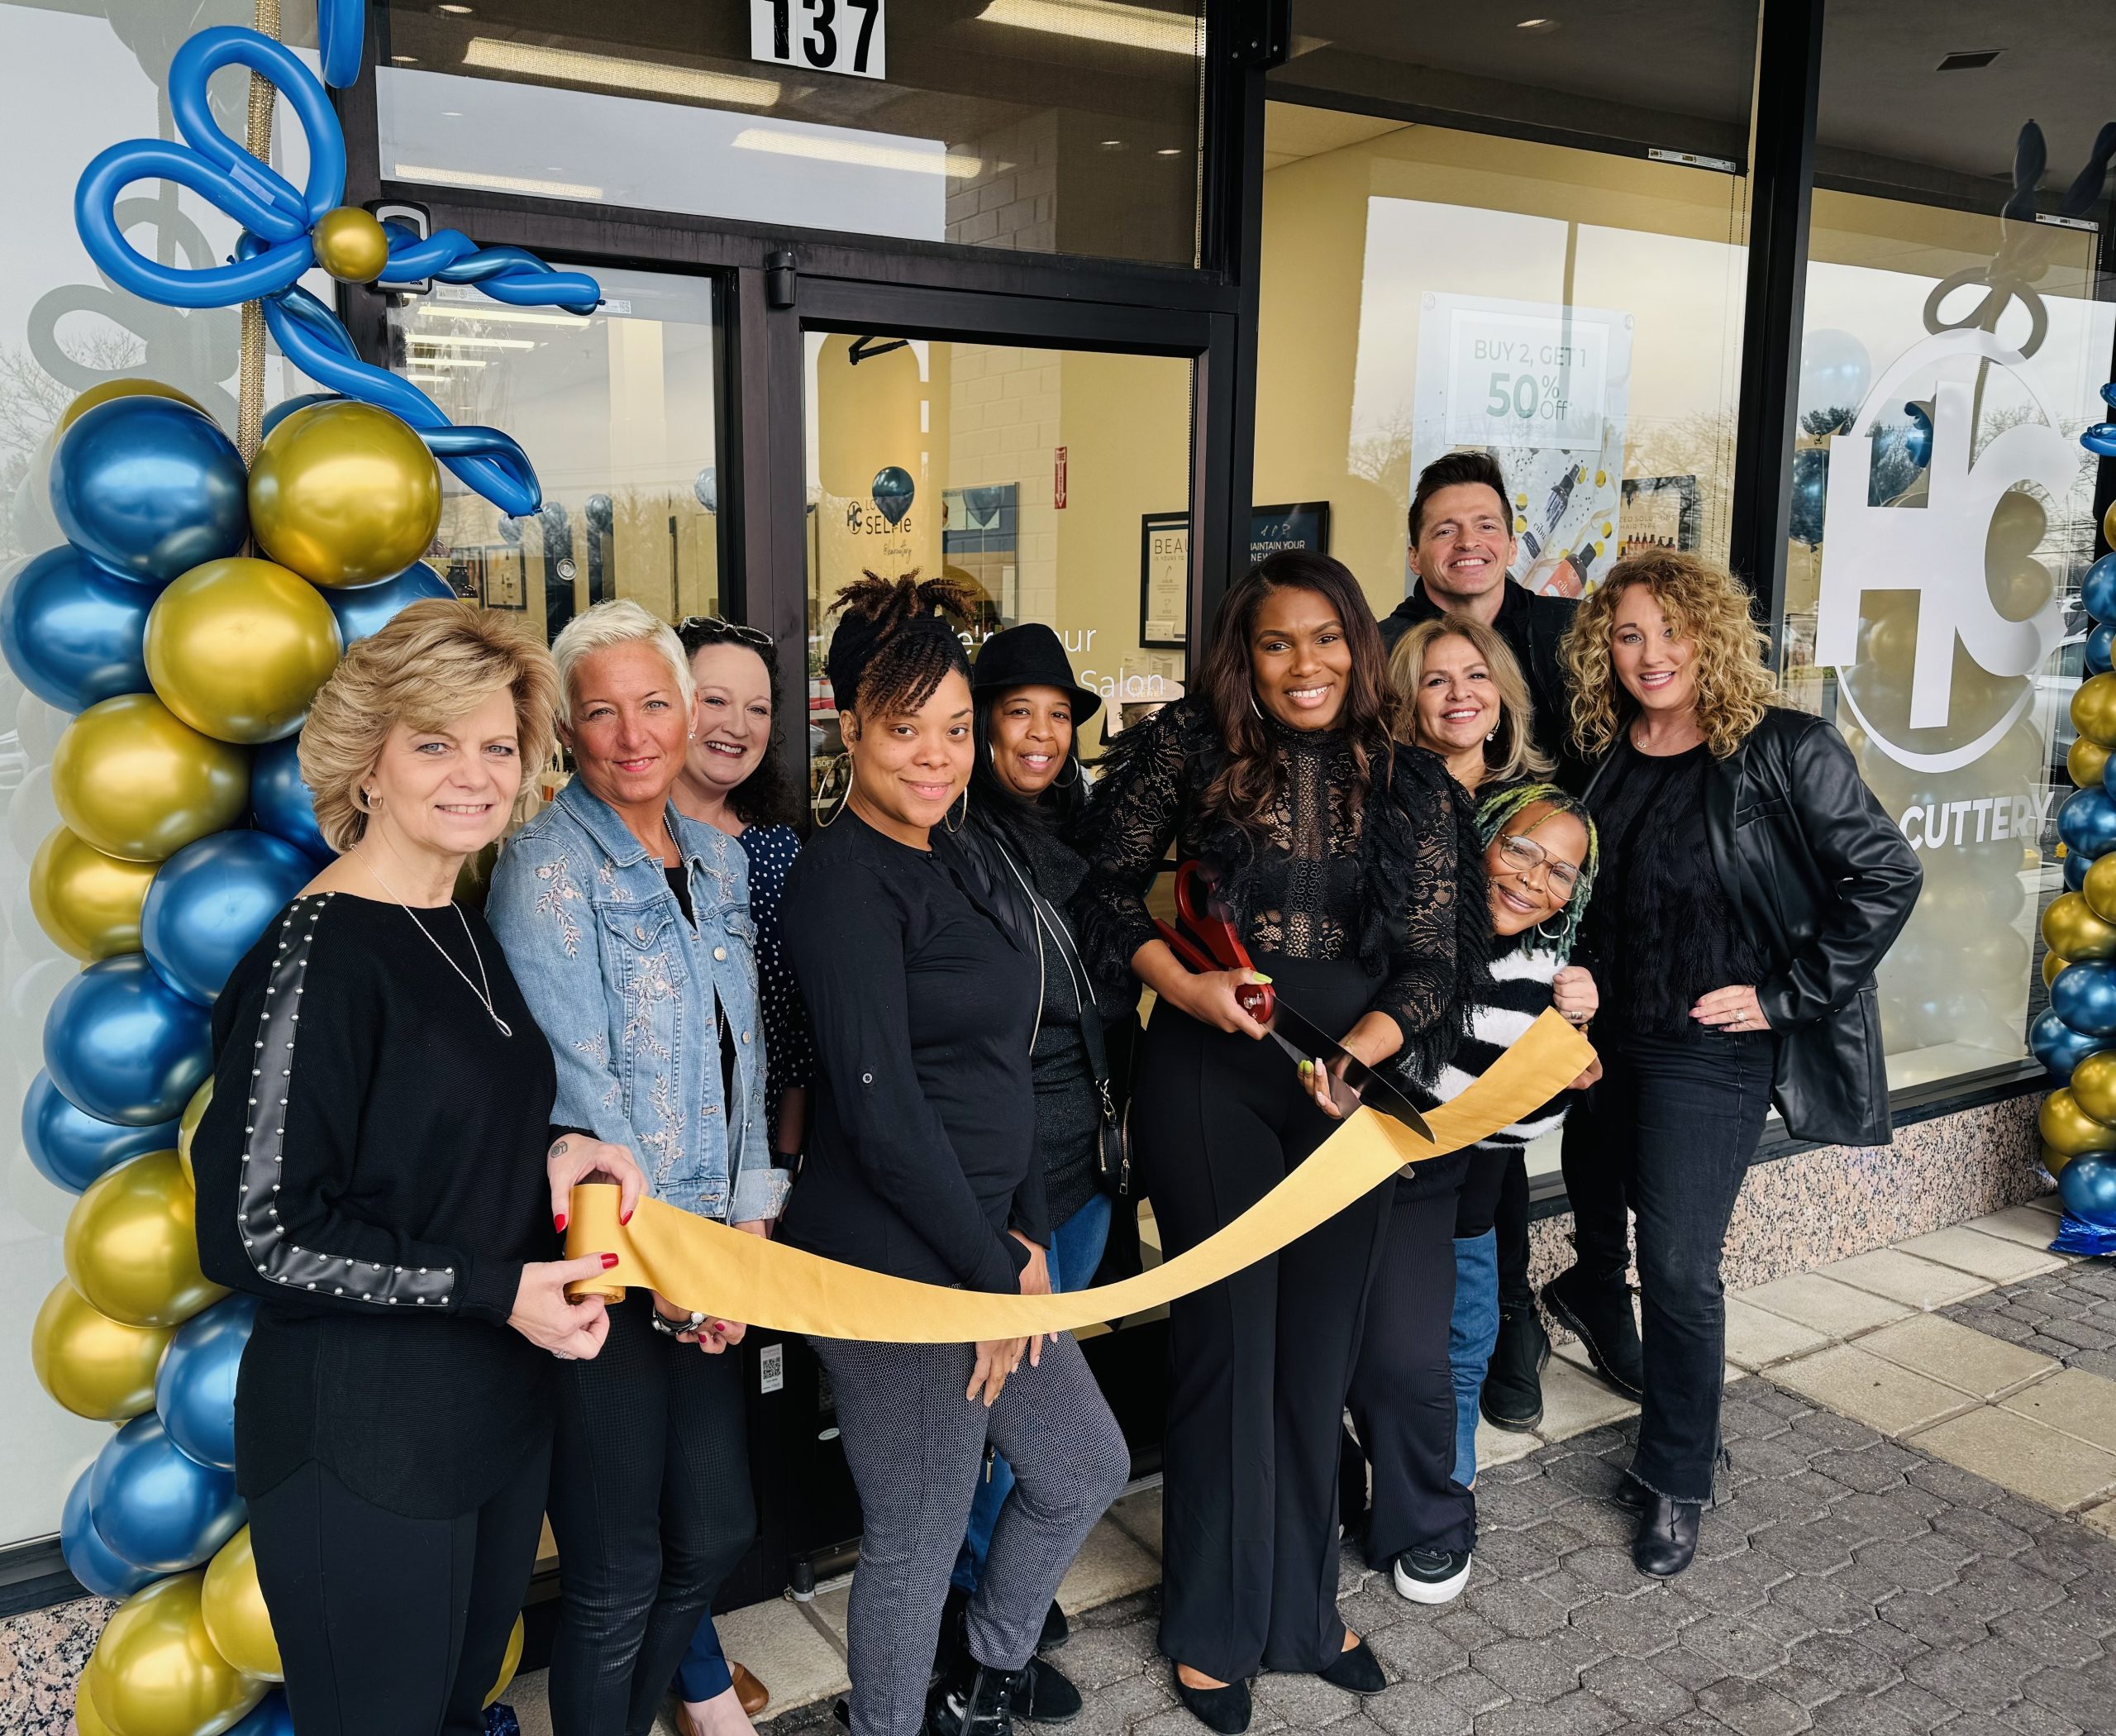 ribbon cutting ceremony at Hair Cuttery